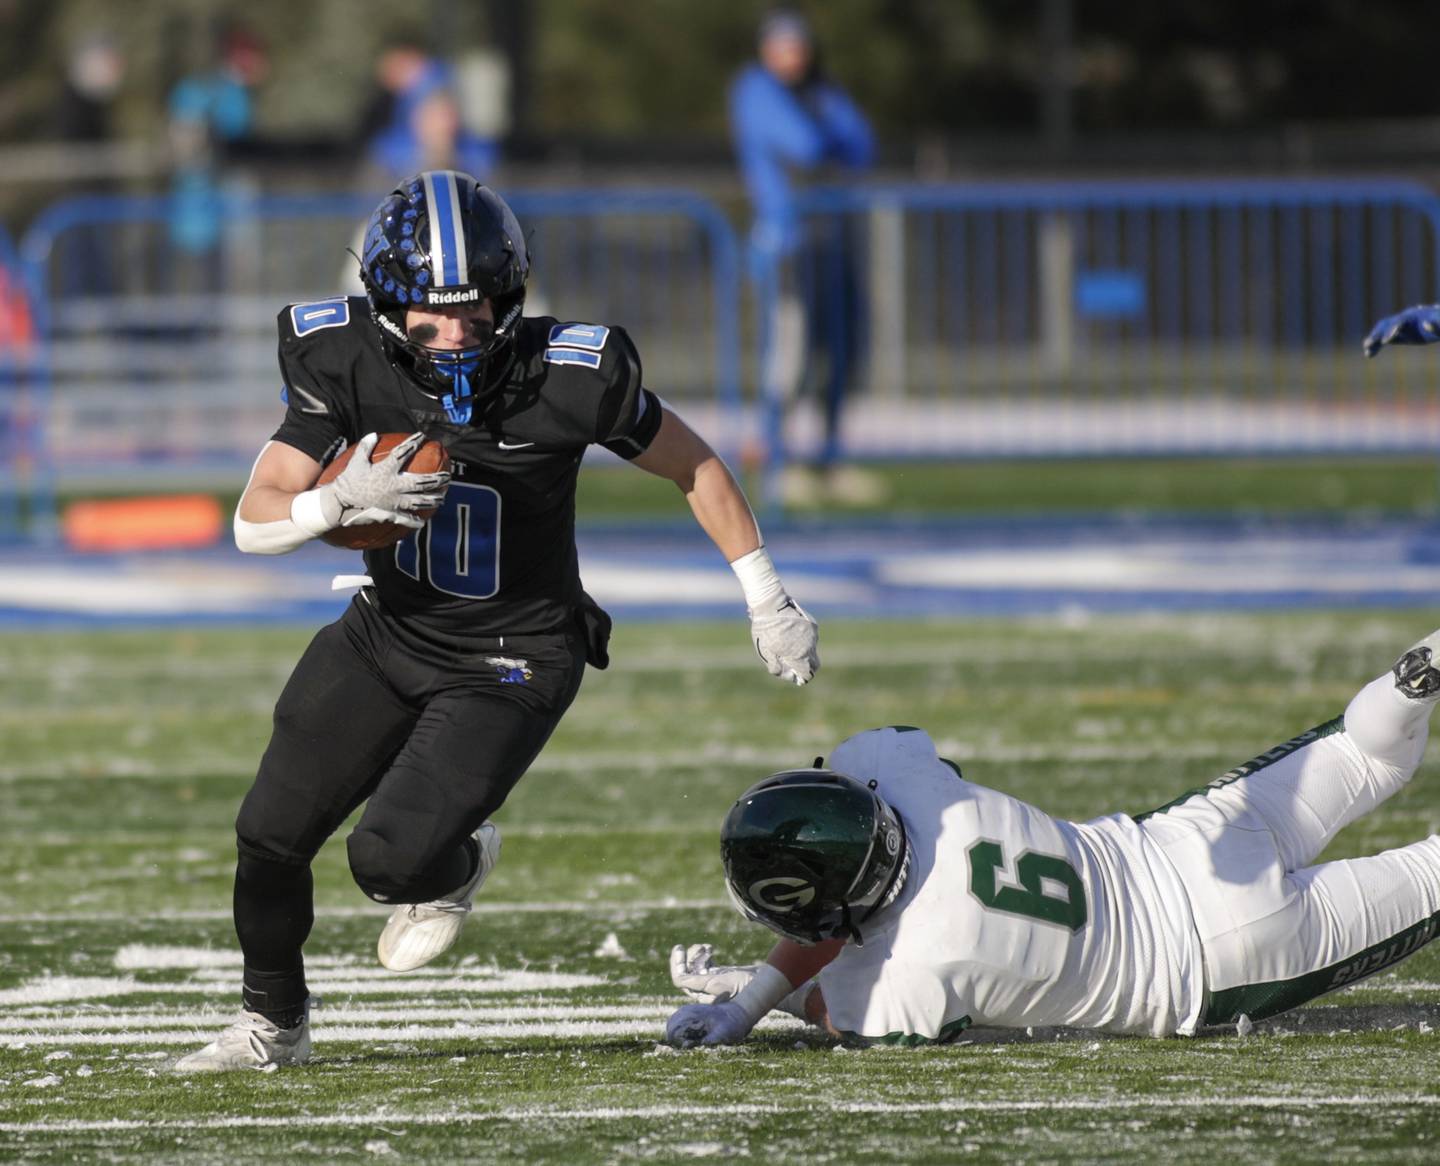 Lincoln-Way East’s Cade Serauskis (10) gets past Glenbard West’s Ben Starmann (6) during a Class 8A state semifinal game in Frankfort on Saturday, Nov. 19, 2022.